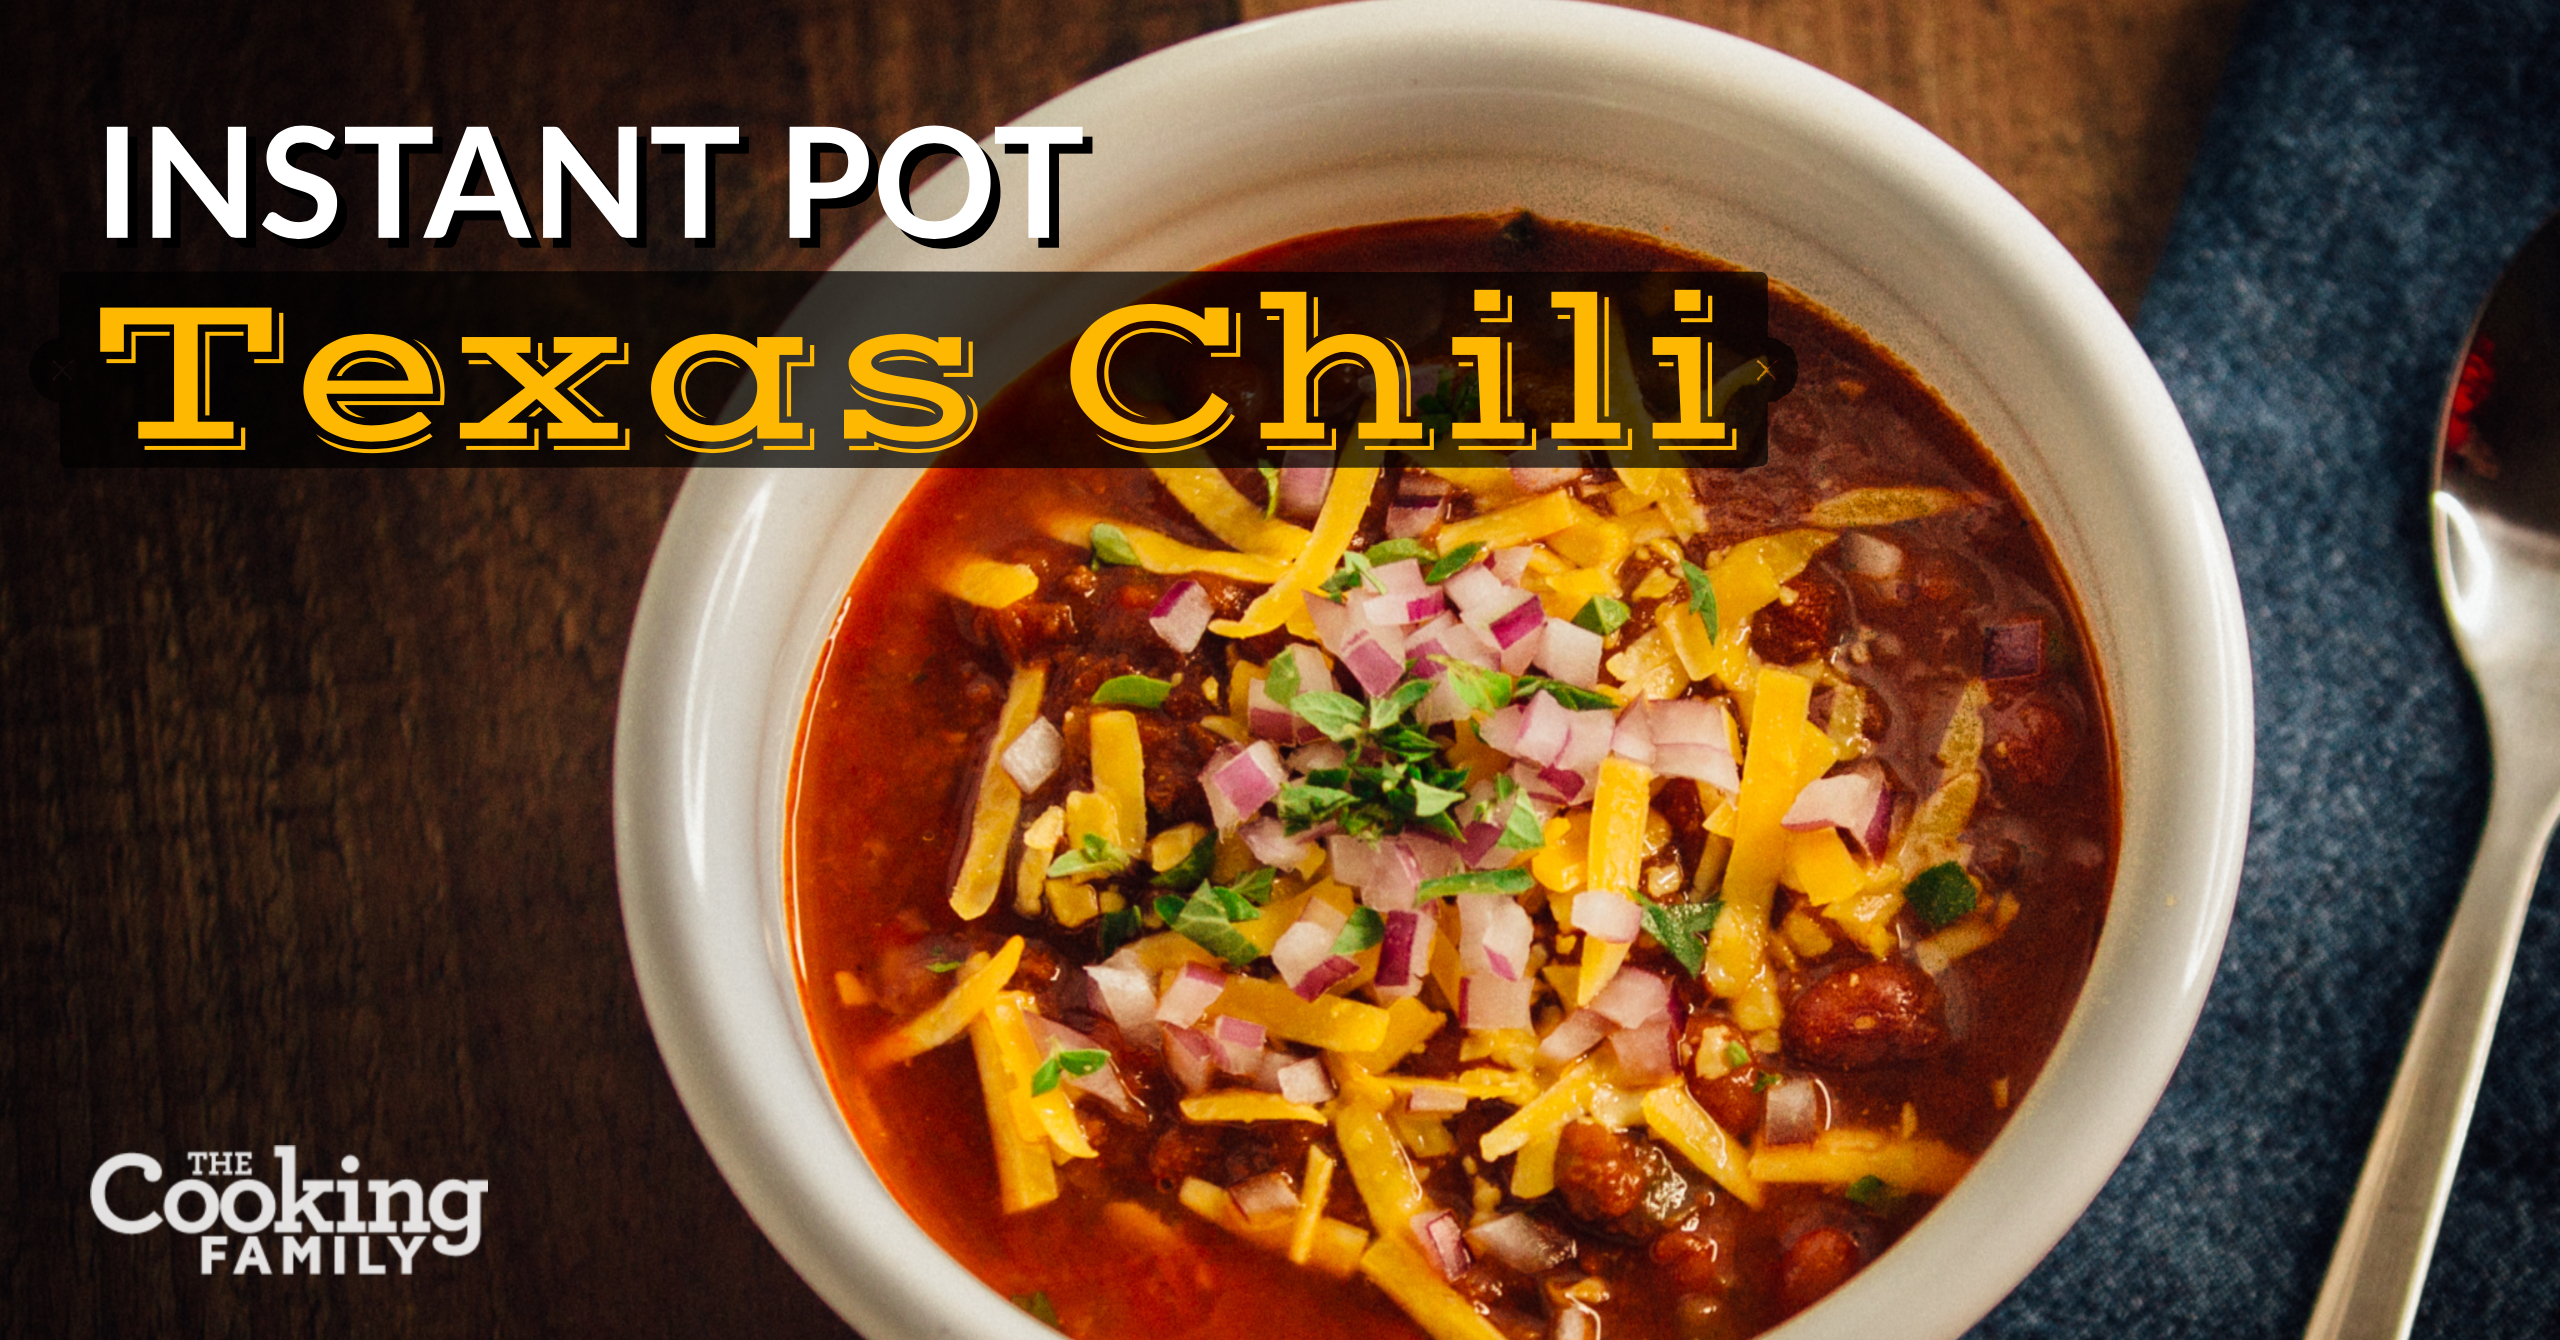 I simmered a pot of MEATY Texas Chili all day for dinner. It has a